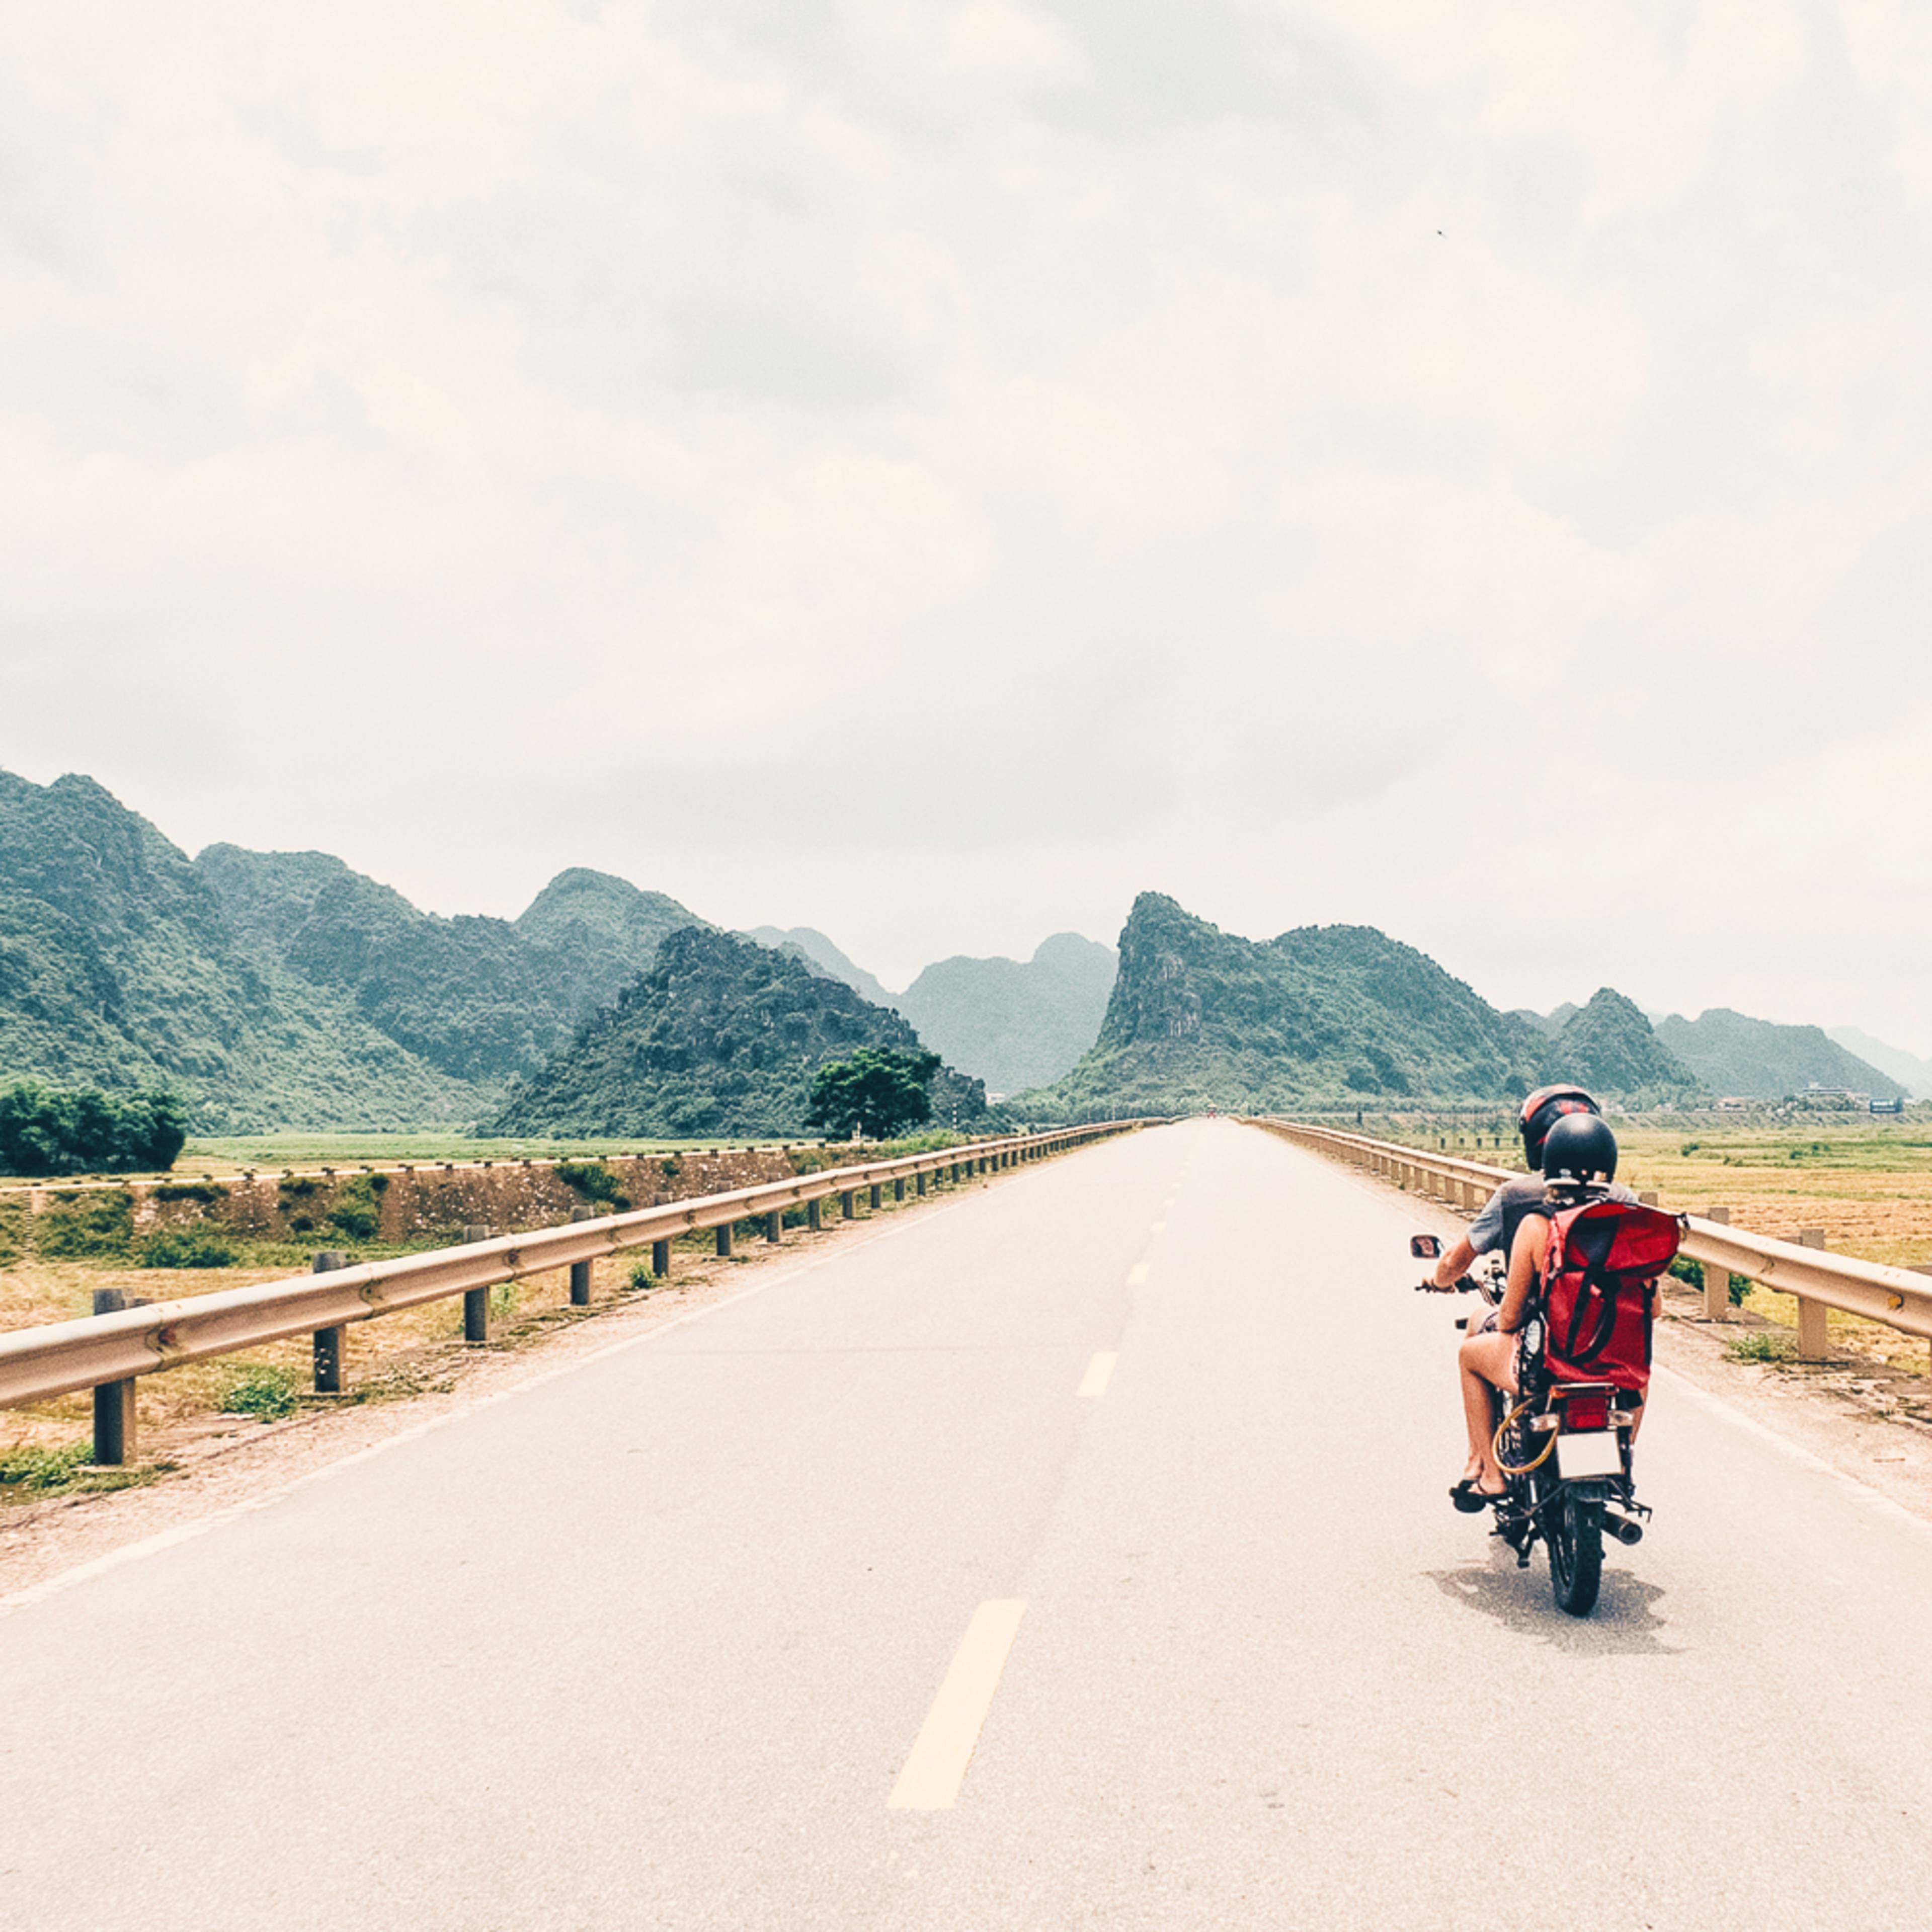 Design your perfect motorbike tour with a local expert in Vietnam